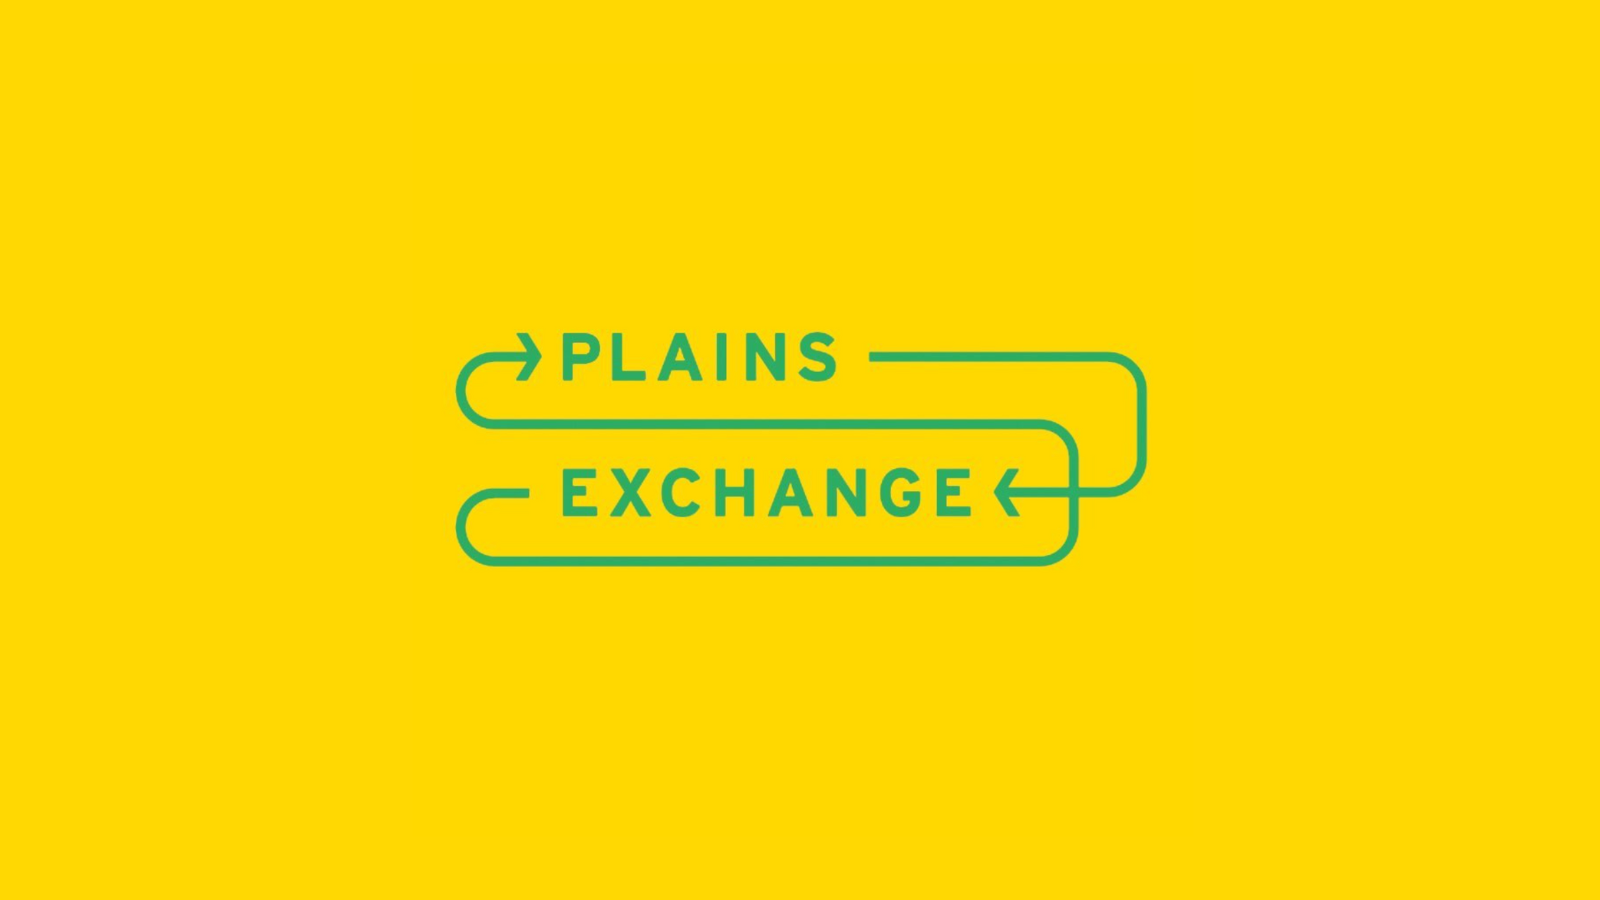 CACHE Partners with Tulsa Artist Fellowship to Launch Plains Exchanges Program